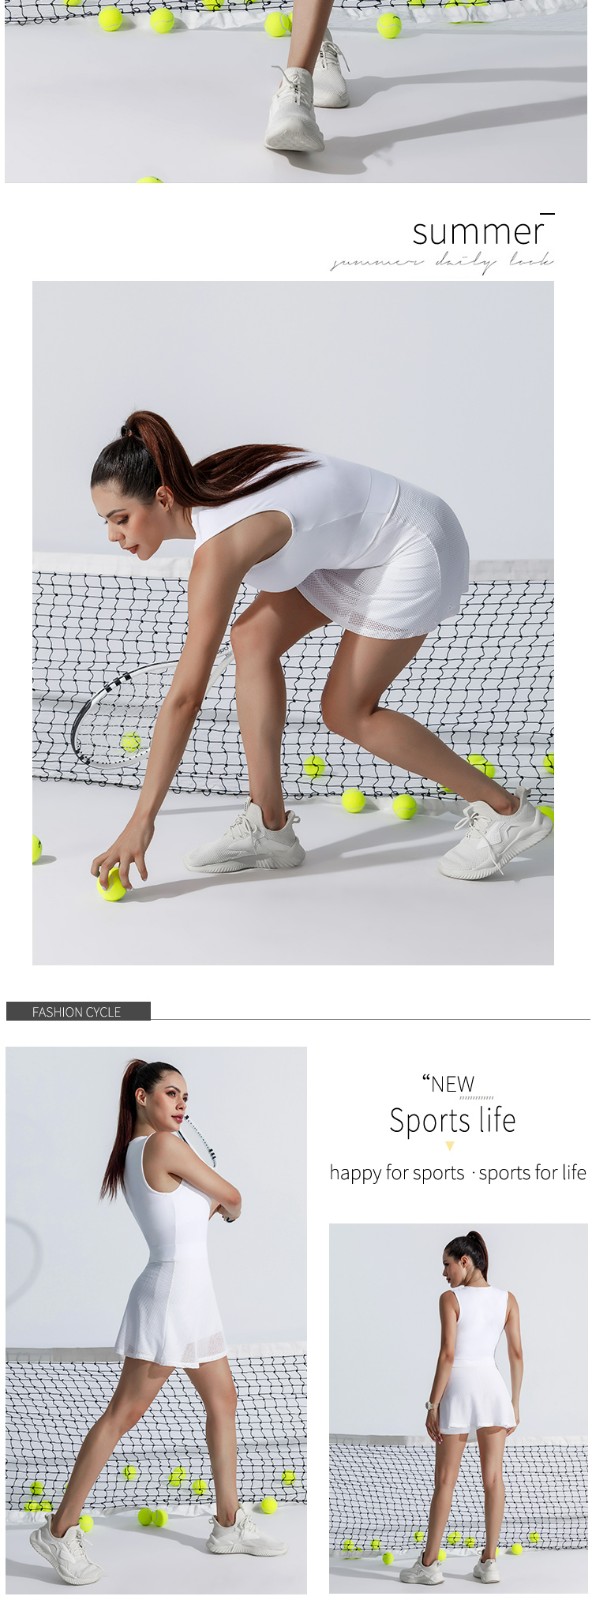 fashion woman tennis clothes experts for yoga-5